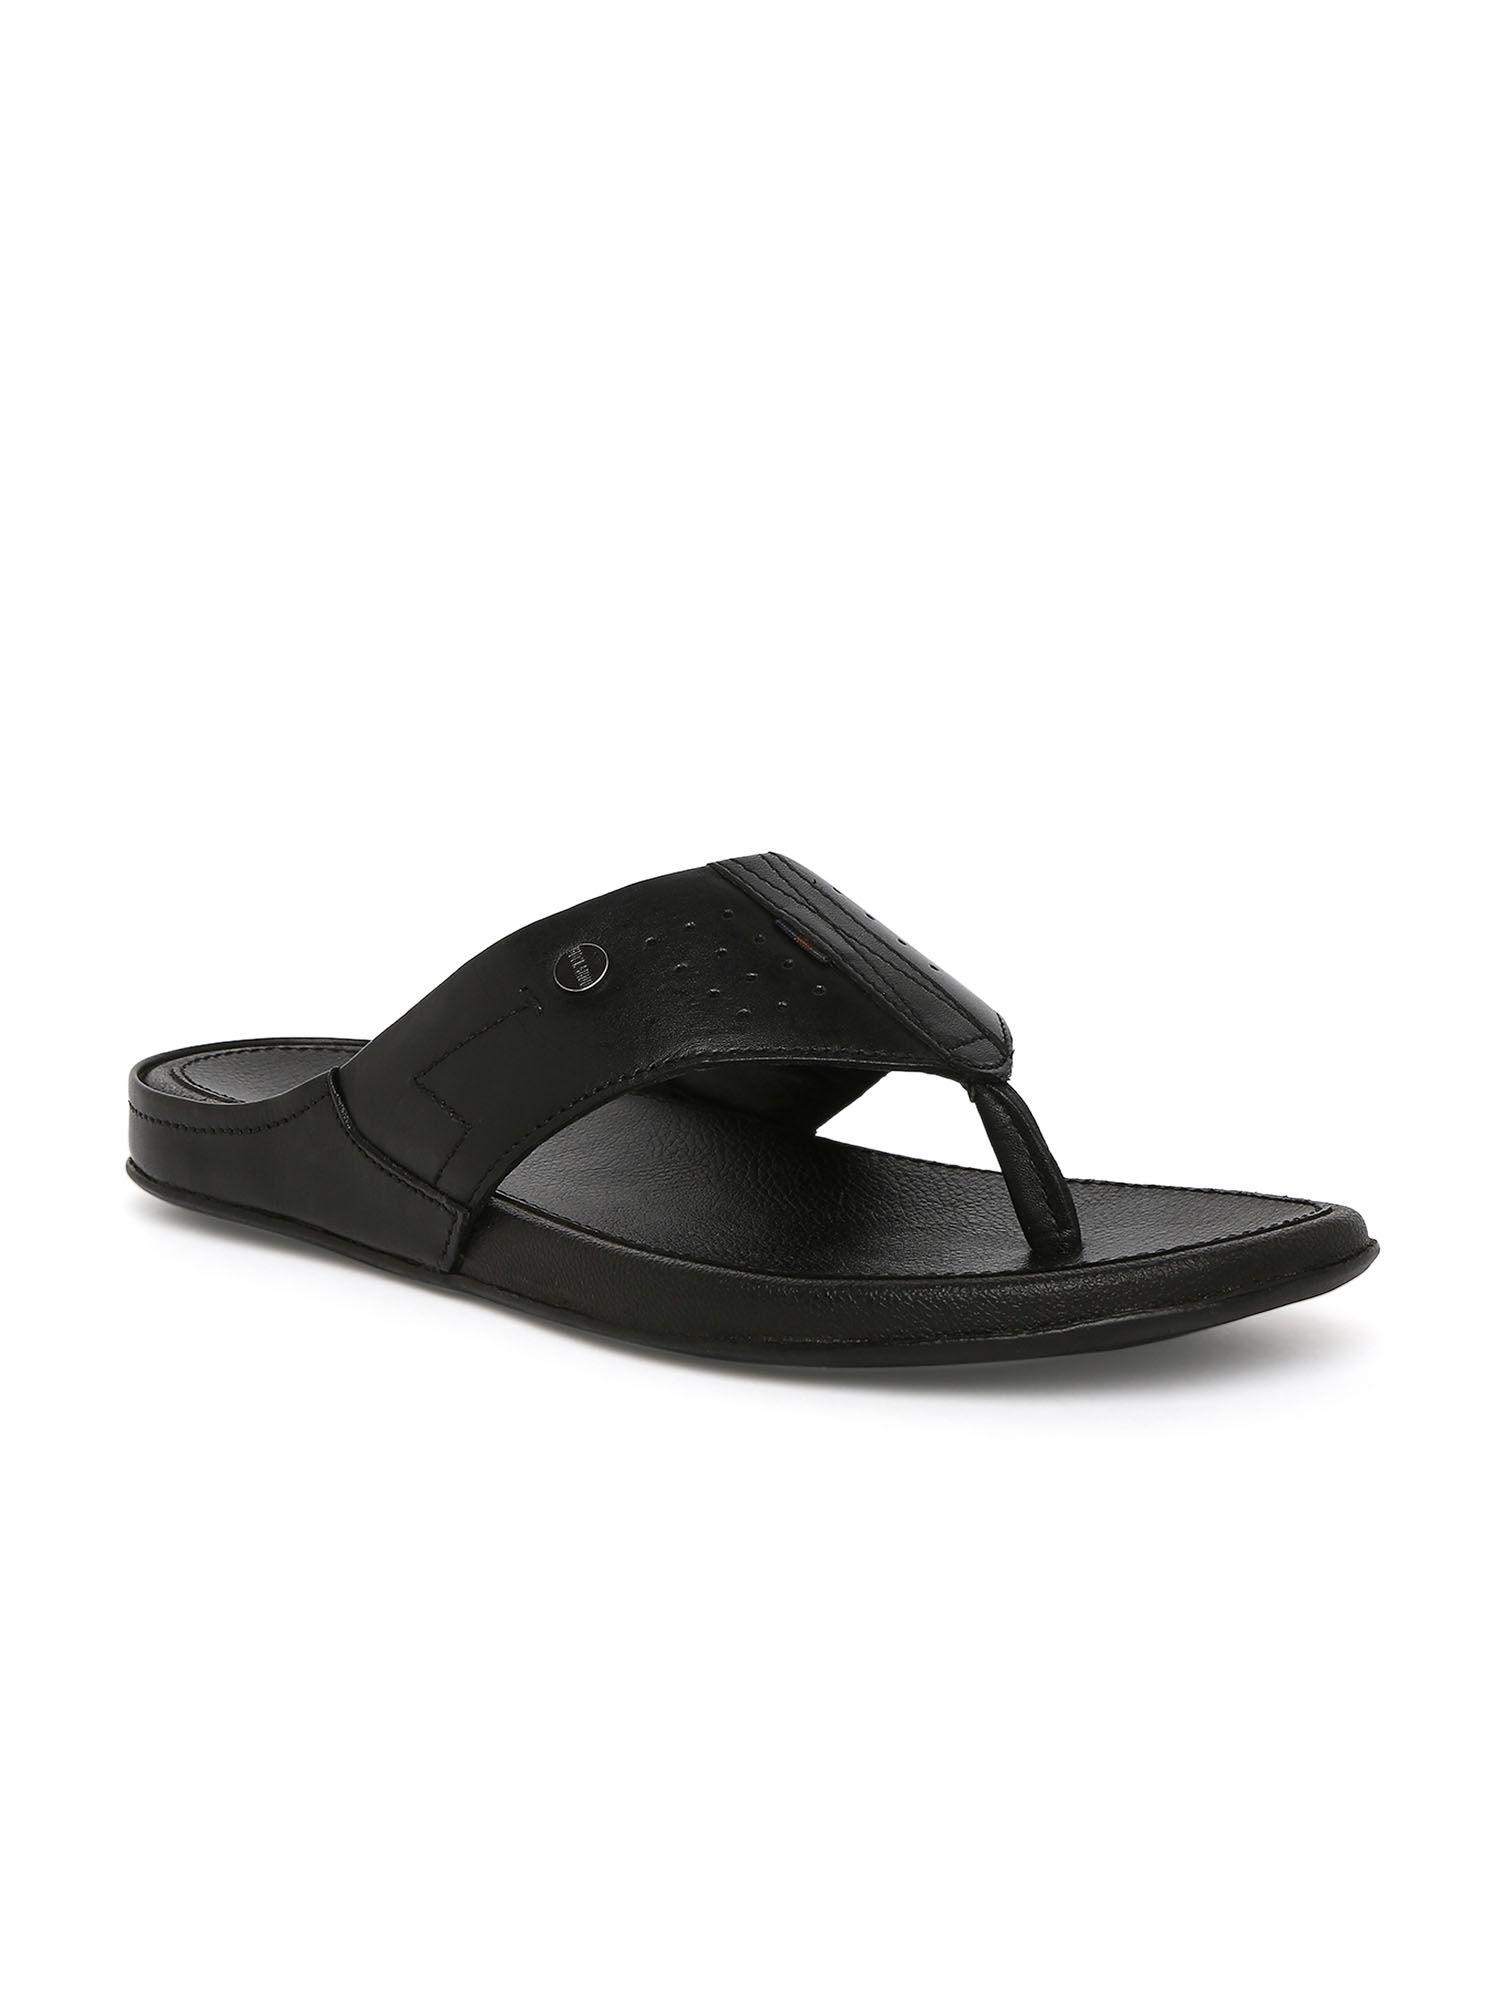 callan new anellien softy natural leather sandal chappal